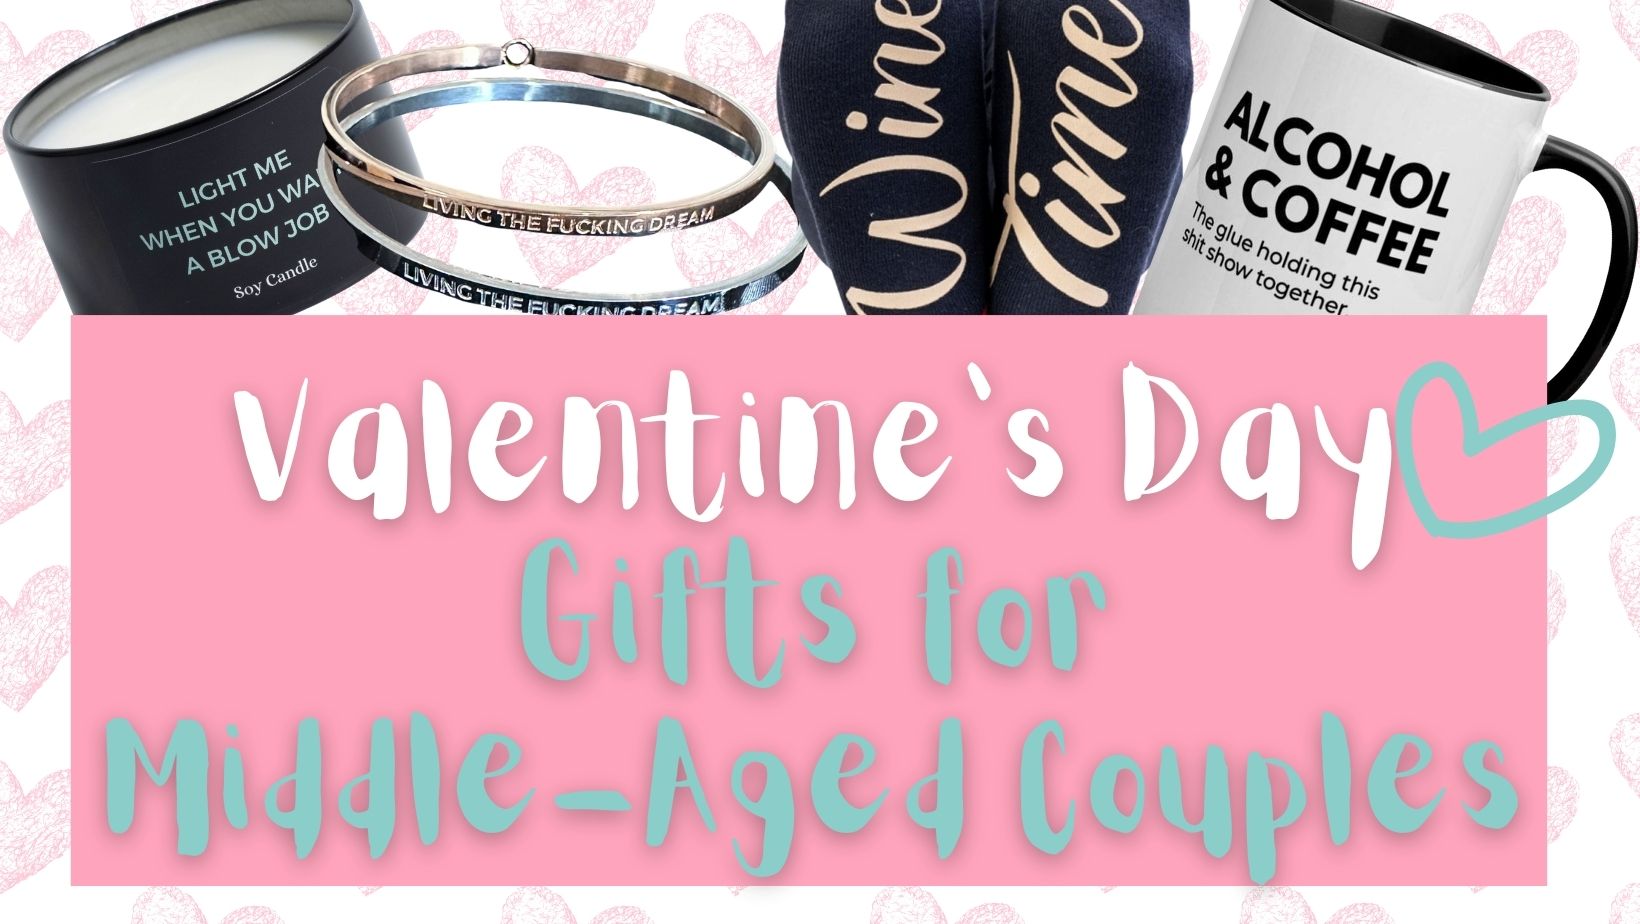 Valentines Day Gift Ideas for Middle-Aged Couples